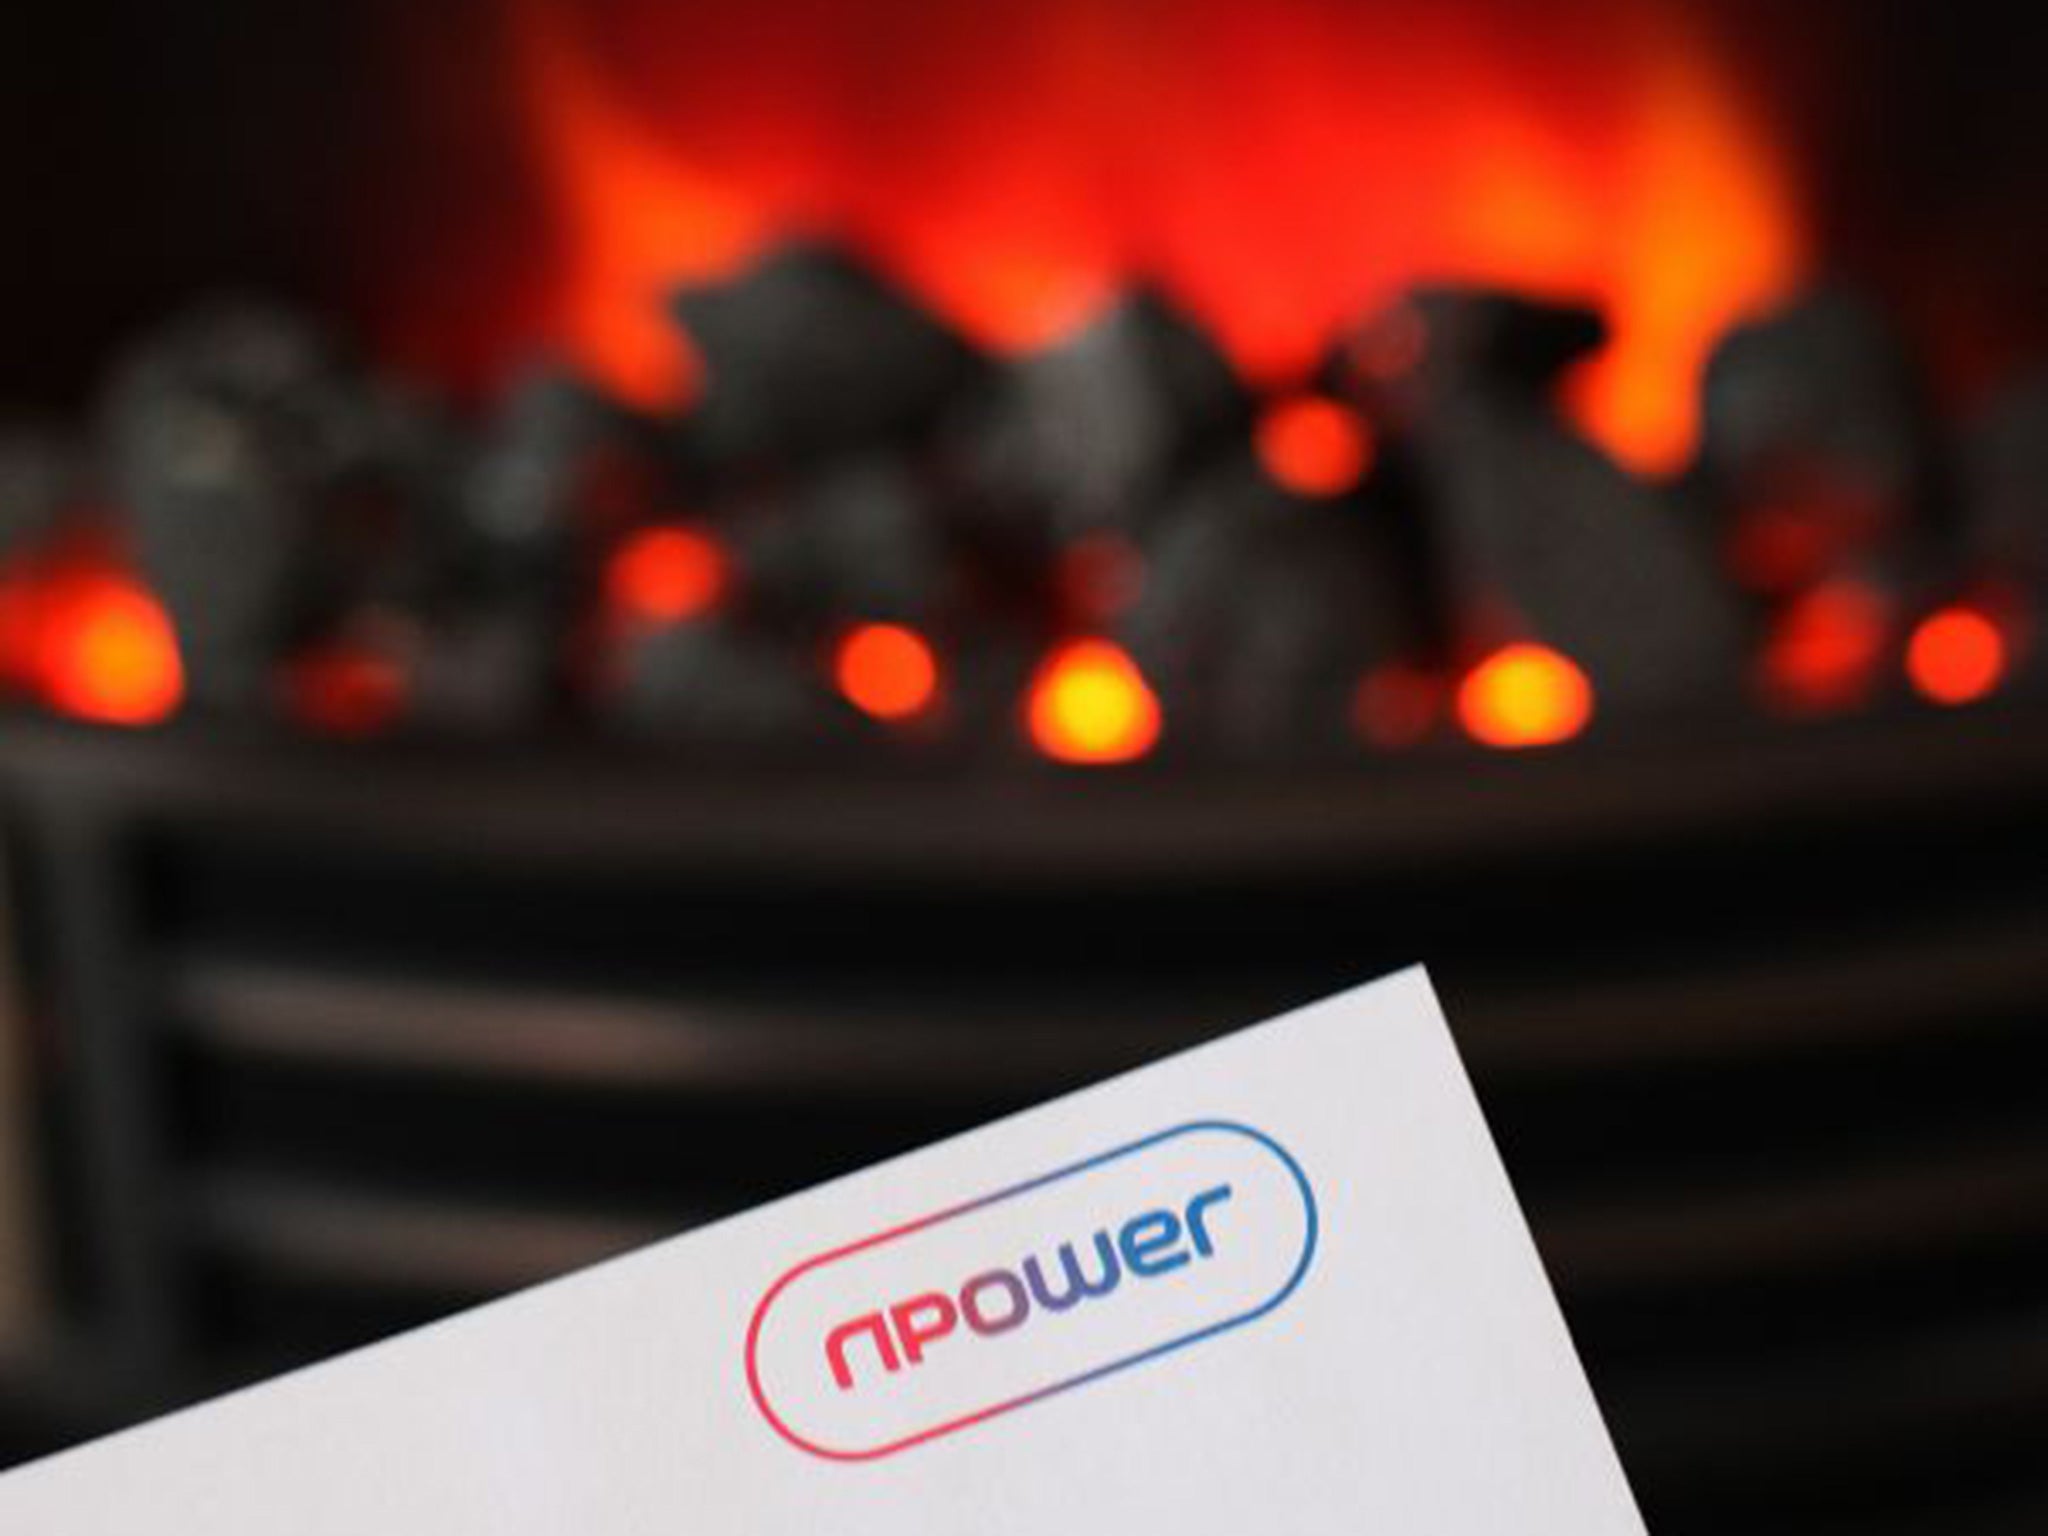 Npower has confirmed that it will cut 2,400 jobs in the UK